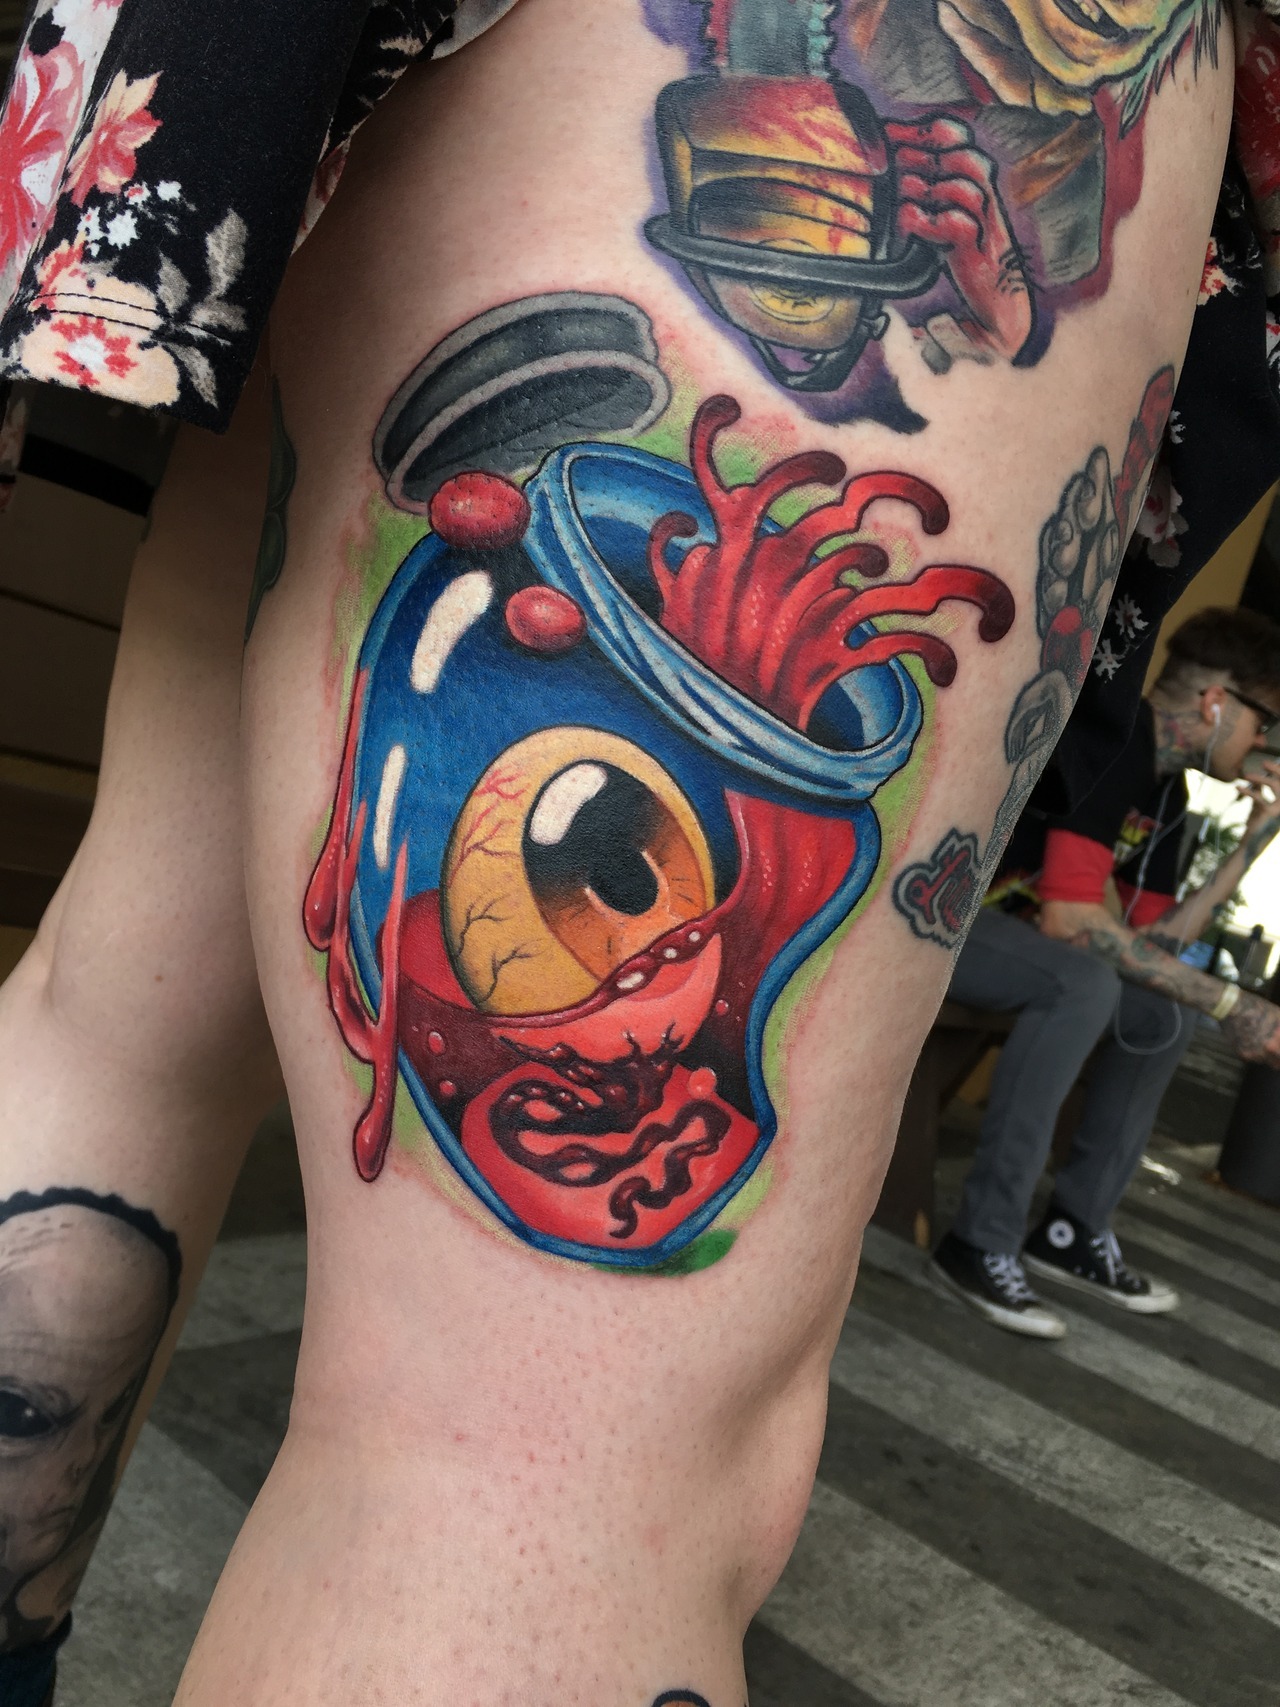 Drink Me Bottle done by Nikolai Hanna of Game Over tattoo of PA at Due  South Tattoo Expo MS  Bottle tattoo Wonderland tattoo Girly tattoos